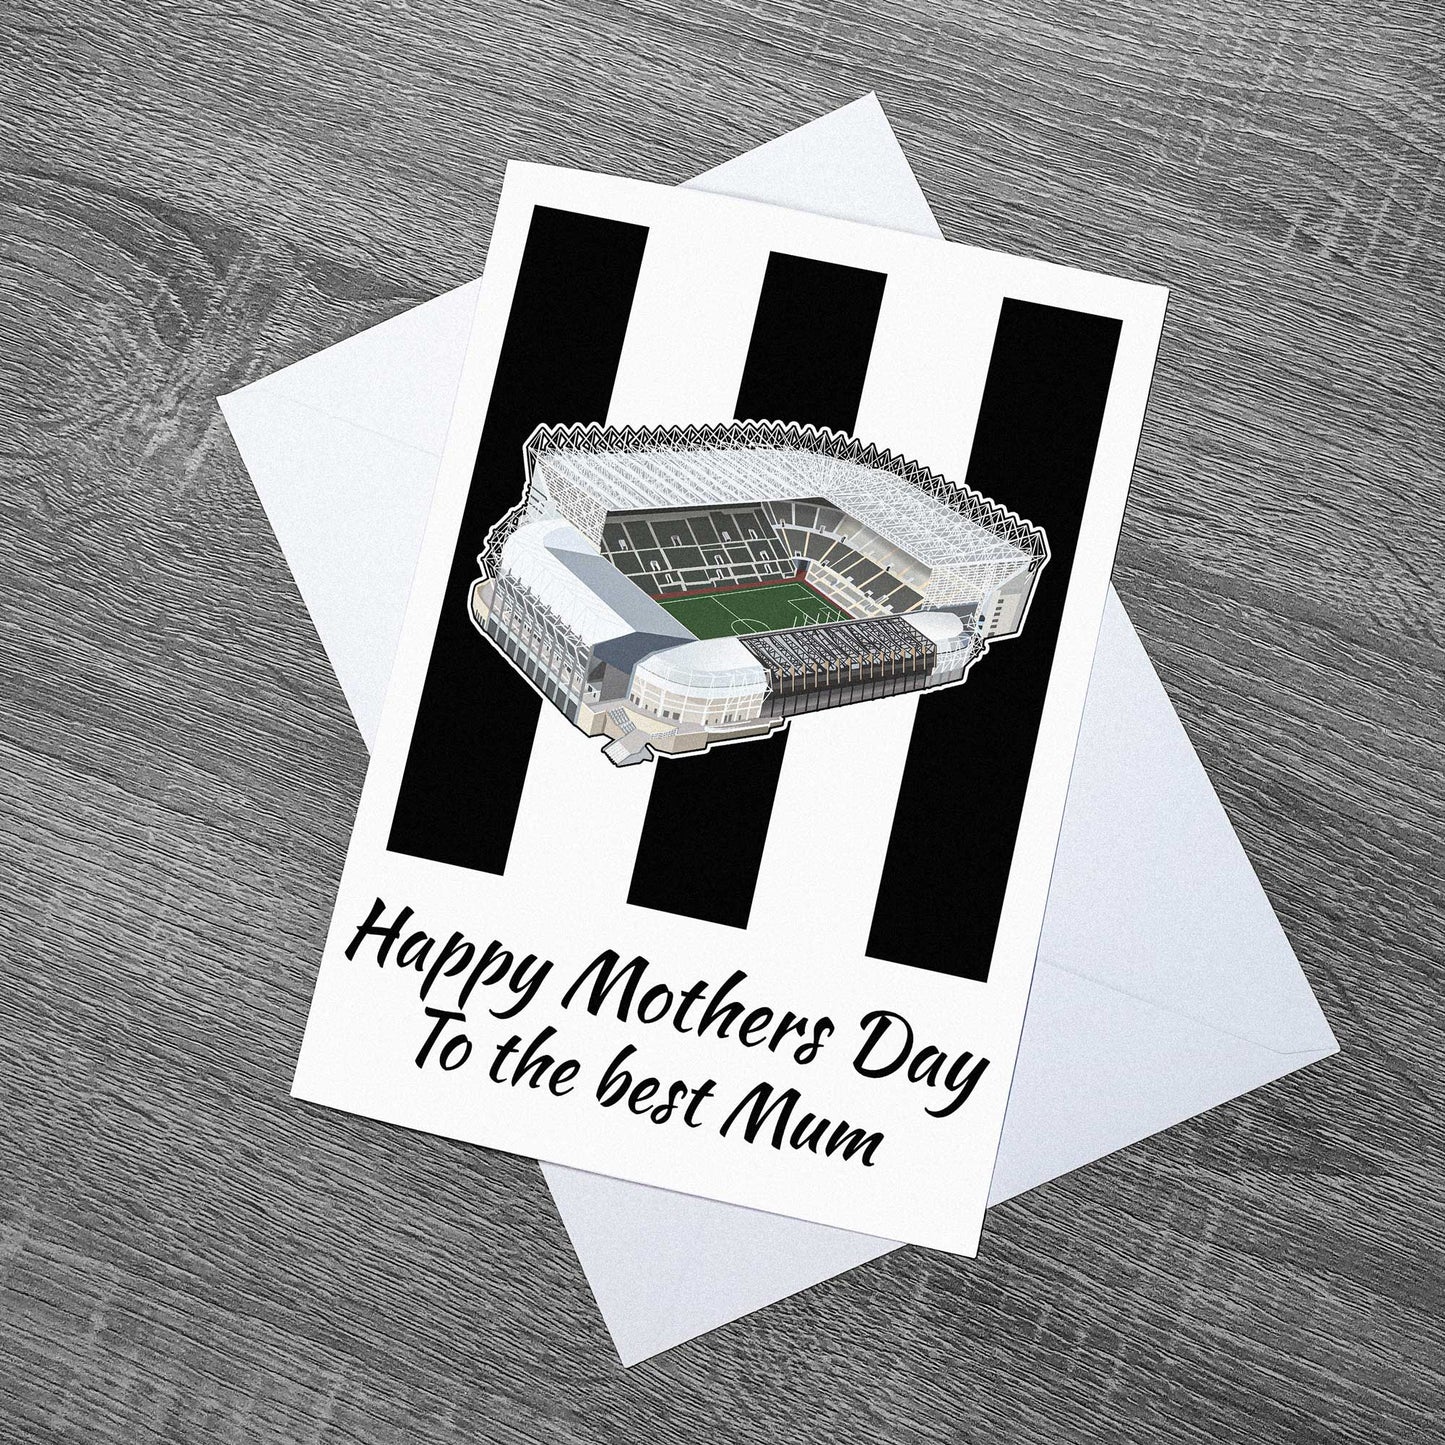 Inspired by the home of Newcastle United Football Club, St James' Park. Mothers day card